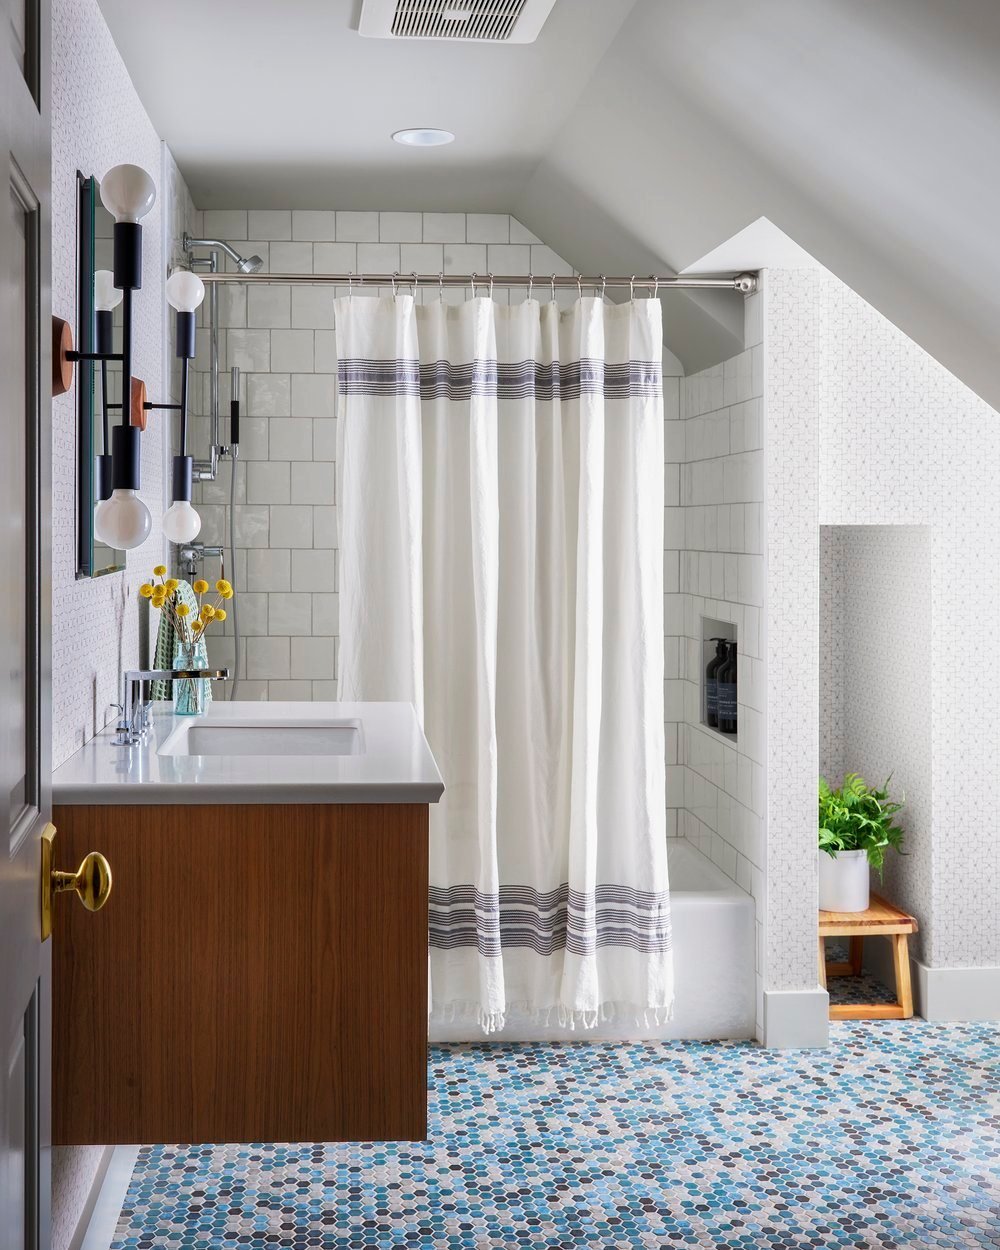 I can't help but love the elegance of a clean, classic bathroom, but that doesn't mean it has to be entirely white. The staying power of subway tiles transcends trendiness, and they pair beautifully with the vibrant mosaic floor. To add another layer